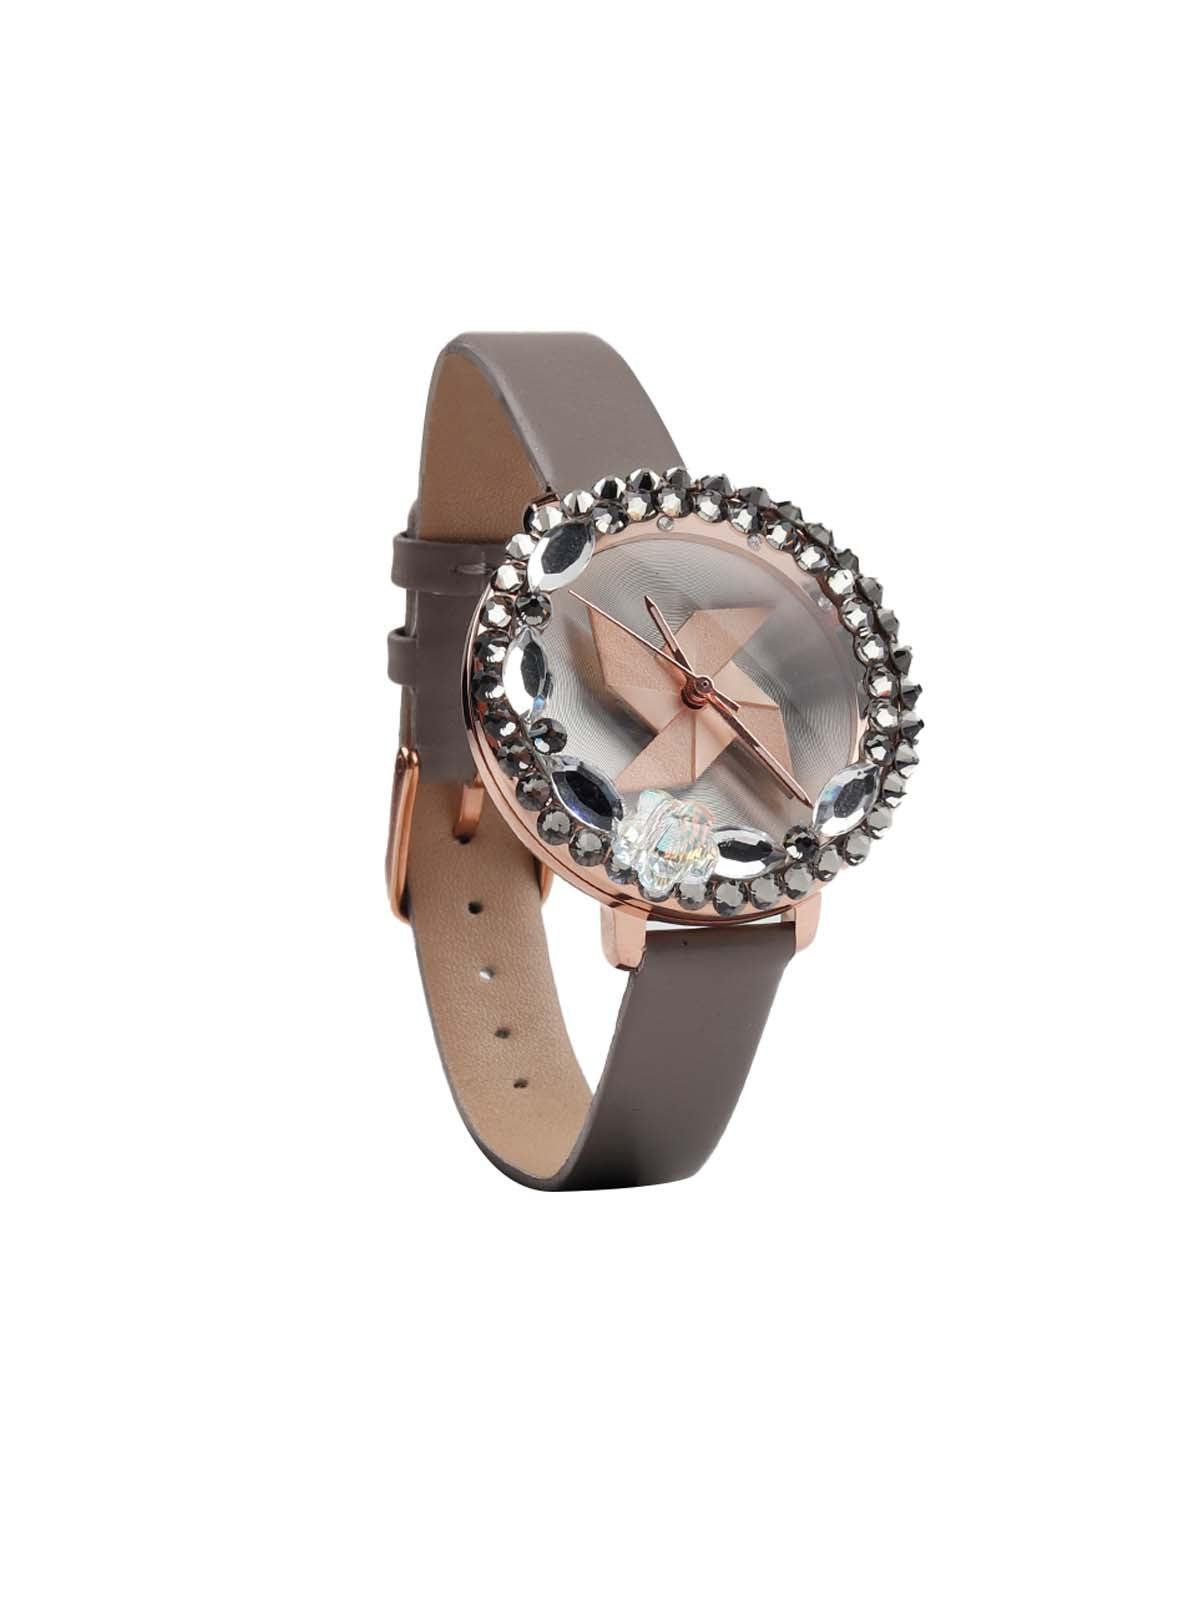 Stylish embellished rounded wristwatch for women - Odette